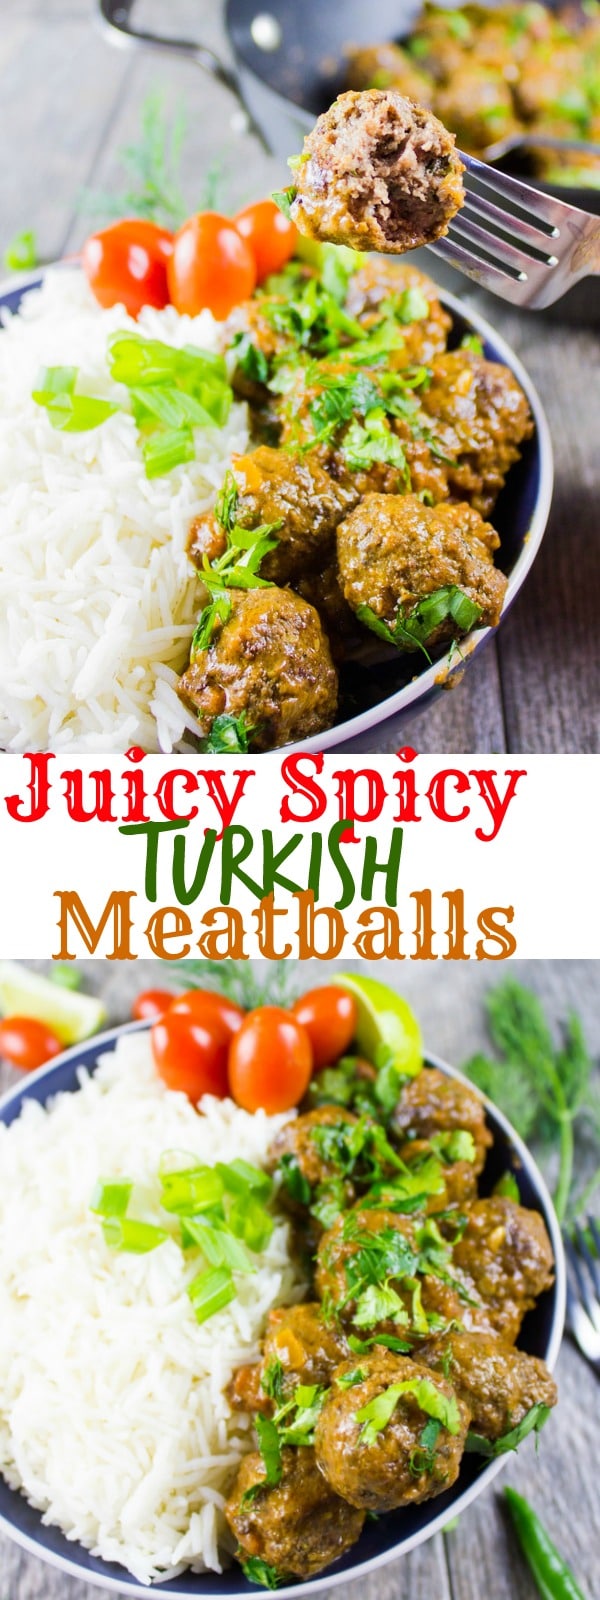 Turkish Meatballs - Juicy and Spicy Kofte | Two Purple Figs